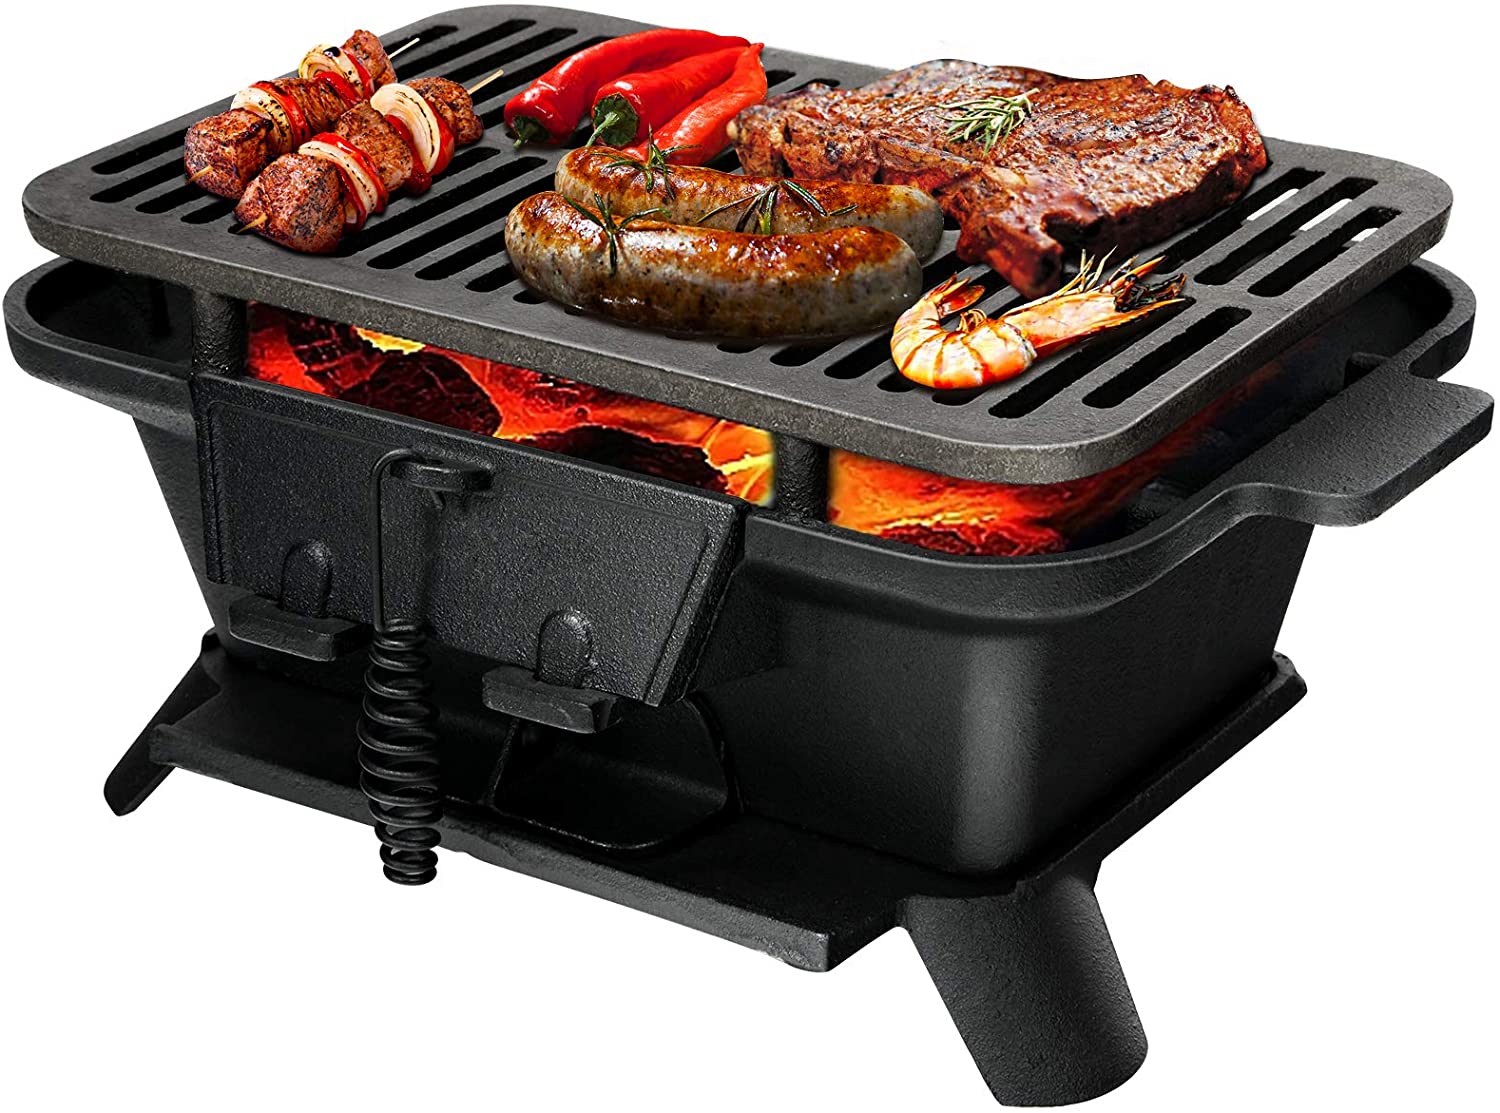 Giantex Charcoal Grill